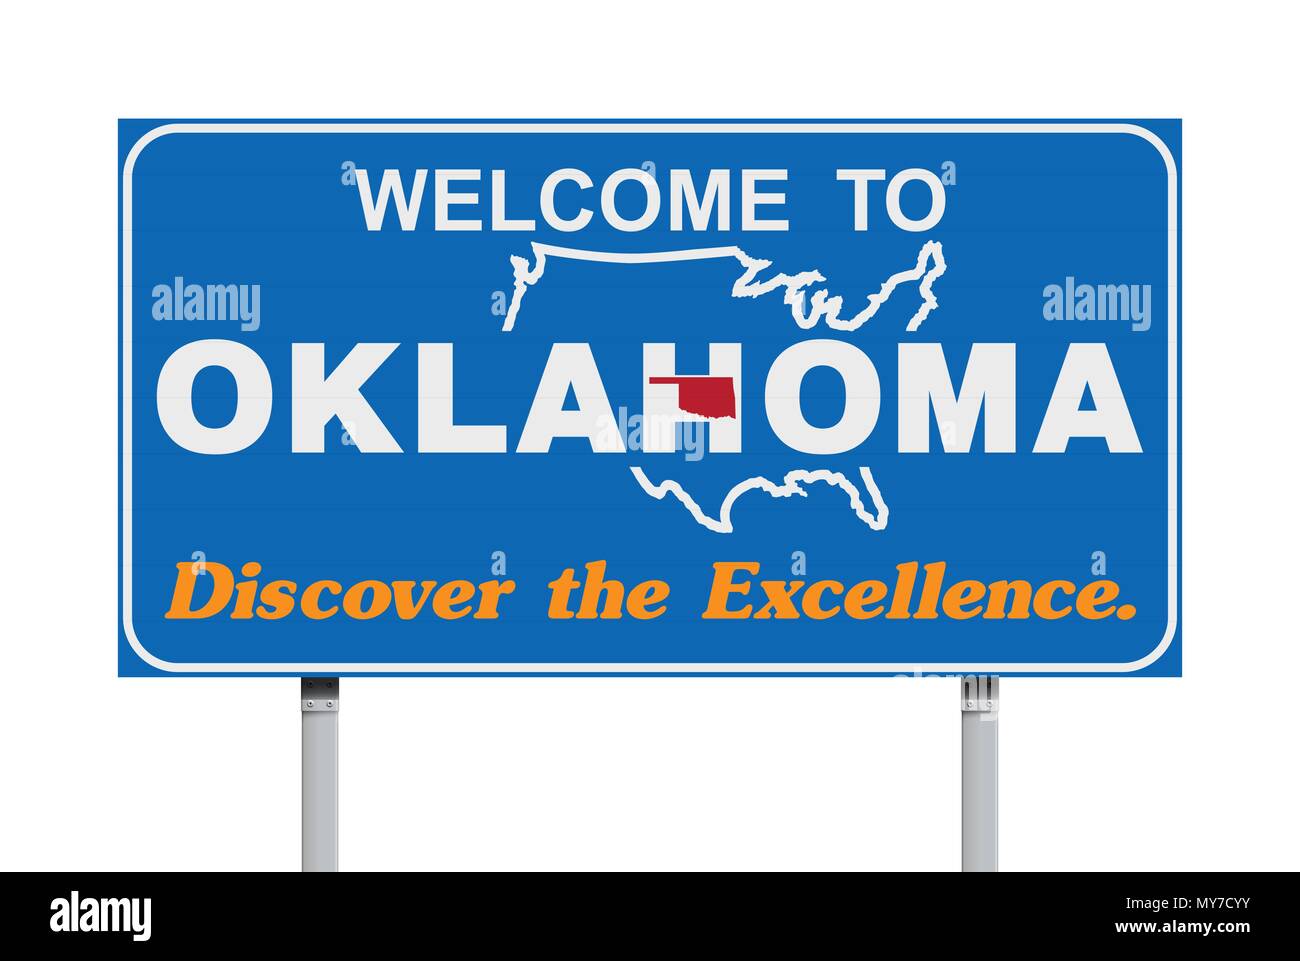 Vector illustration of the Welcome to Oklahoma blue road sign with the official nickname 'Discover the Excellence.' Stock Vector